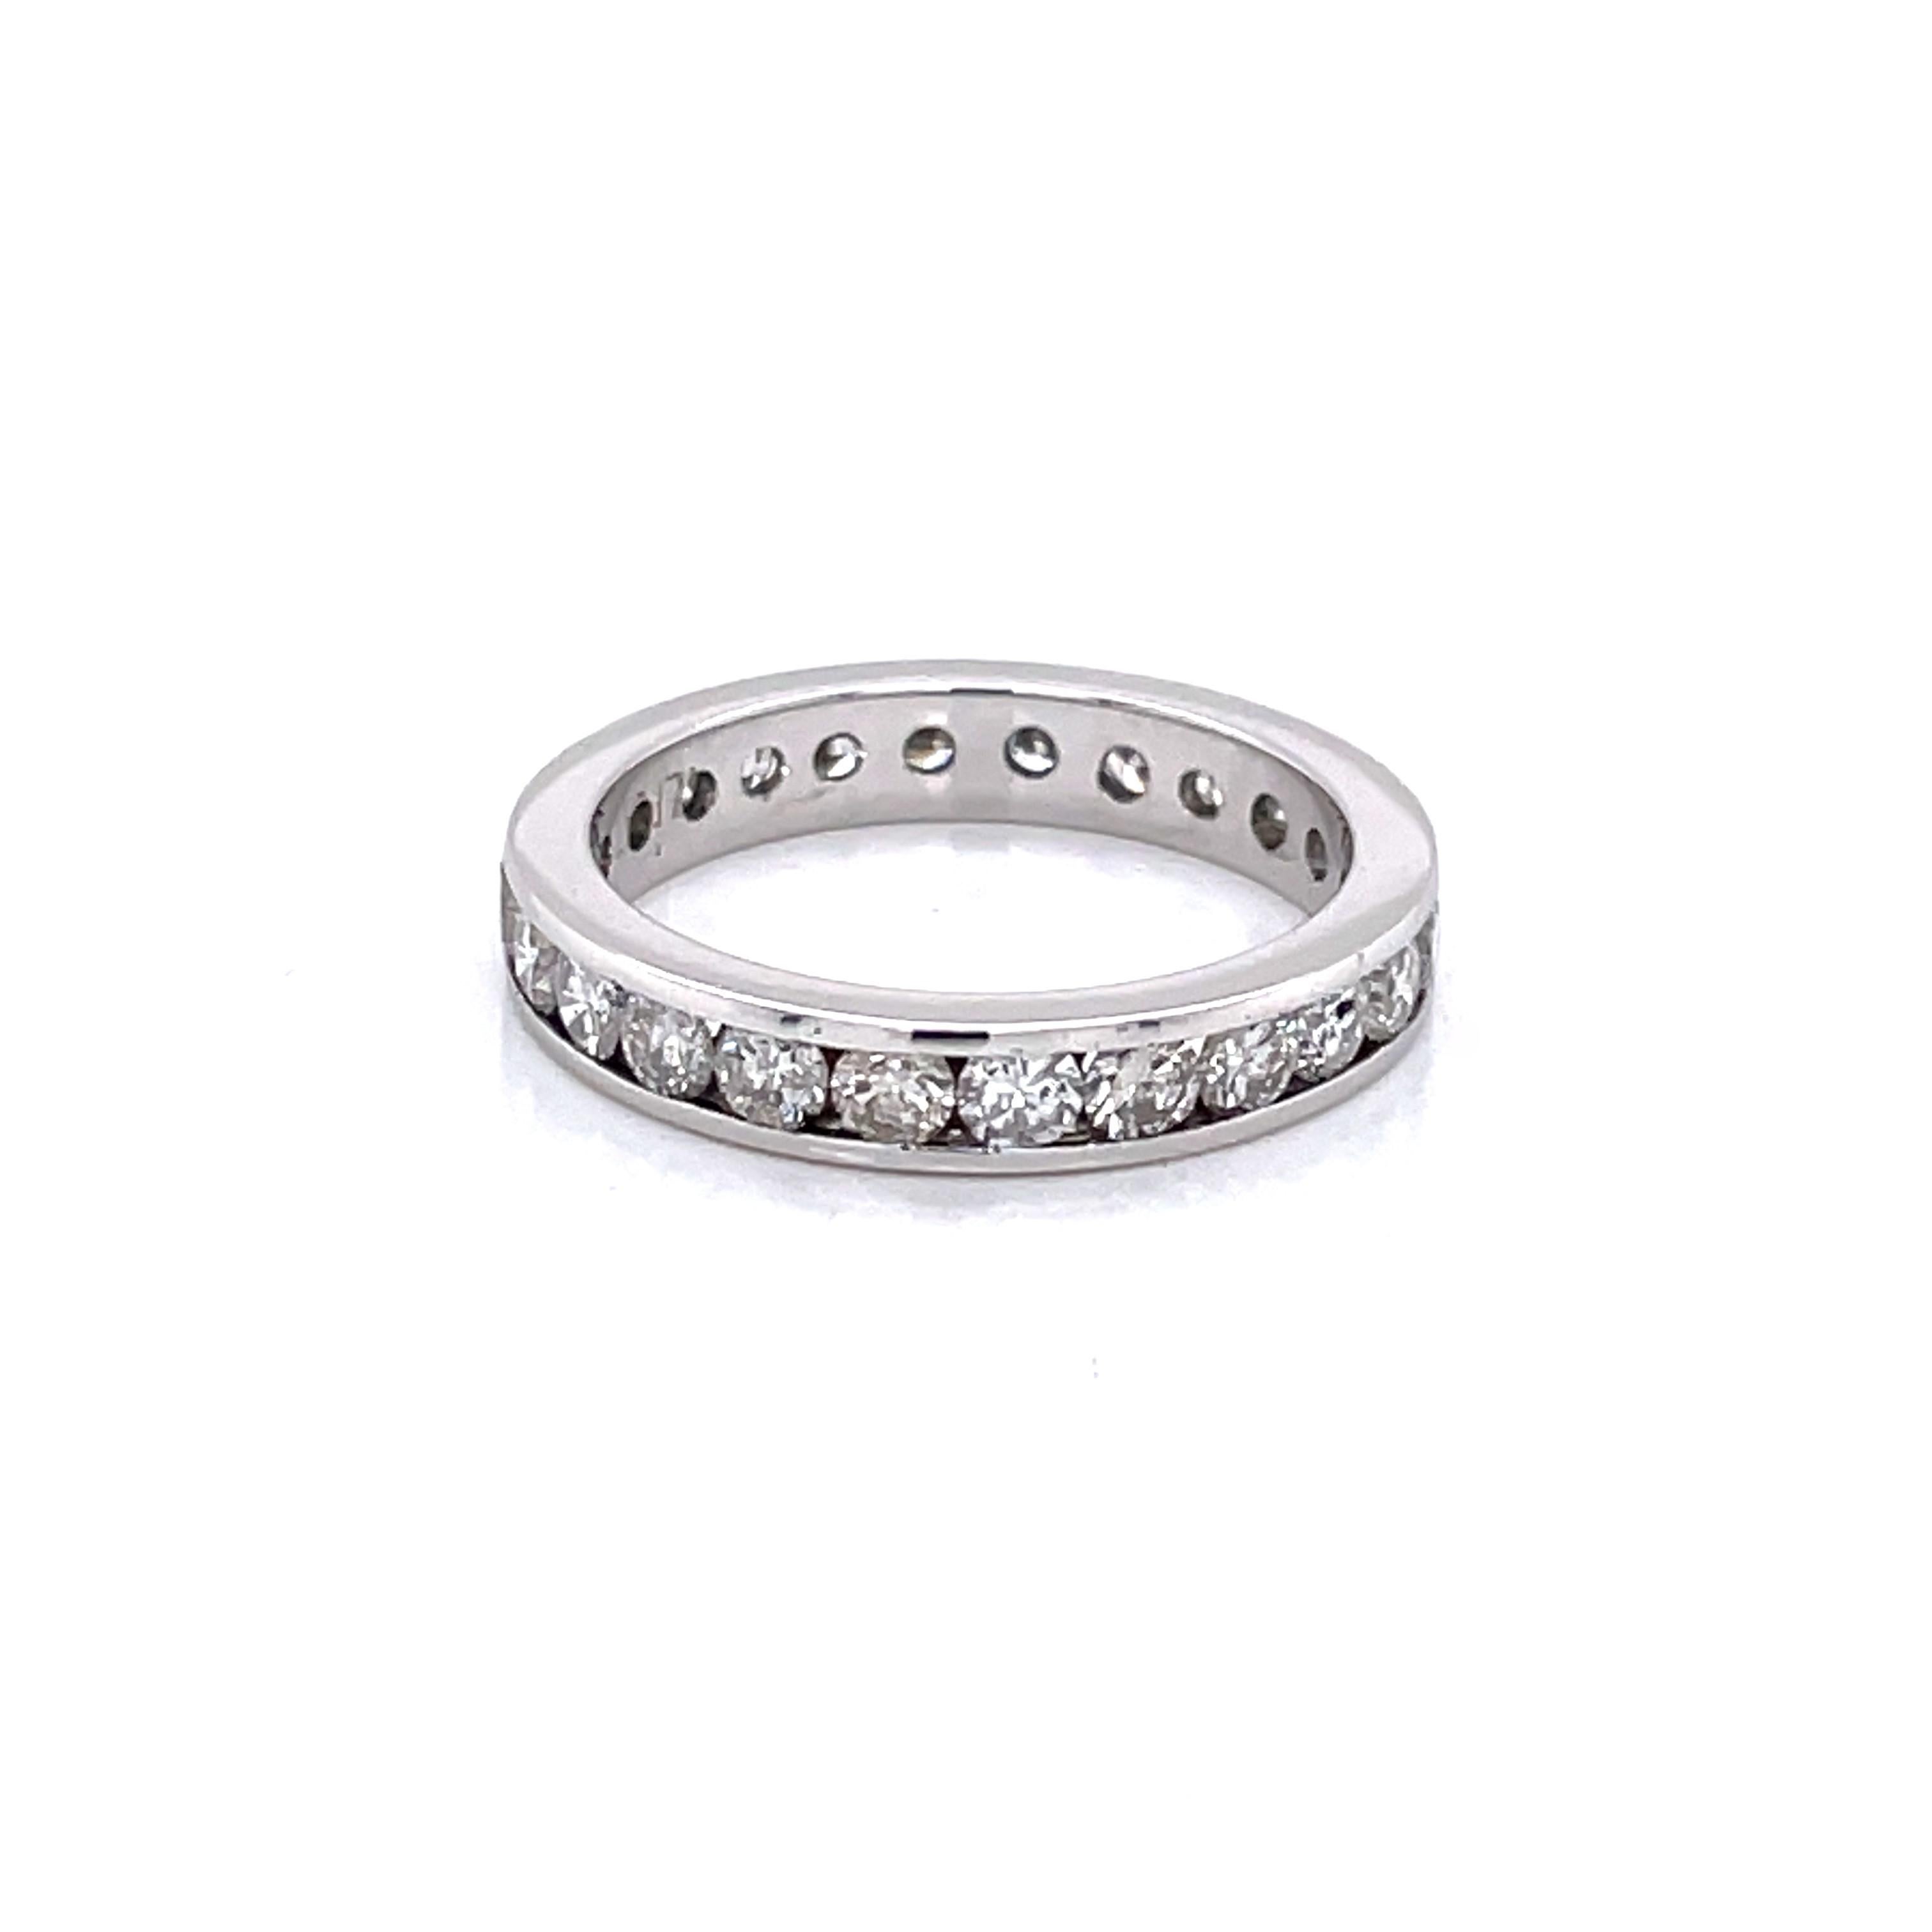 Twenty four .05 carat round faceted H/VS diamonds, 1.20 carats total weight, are infinitely channel set along this platinum band to signify eternal love.
This ring is versatile to wear on its own or to stack as a complement to other significant